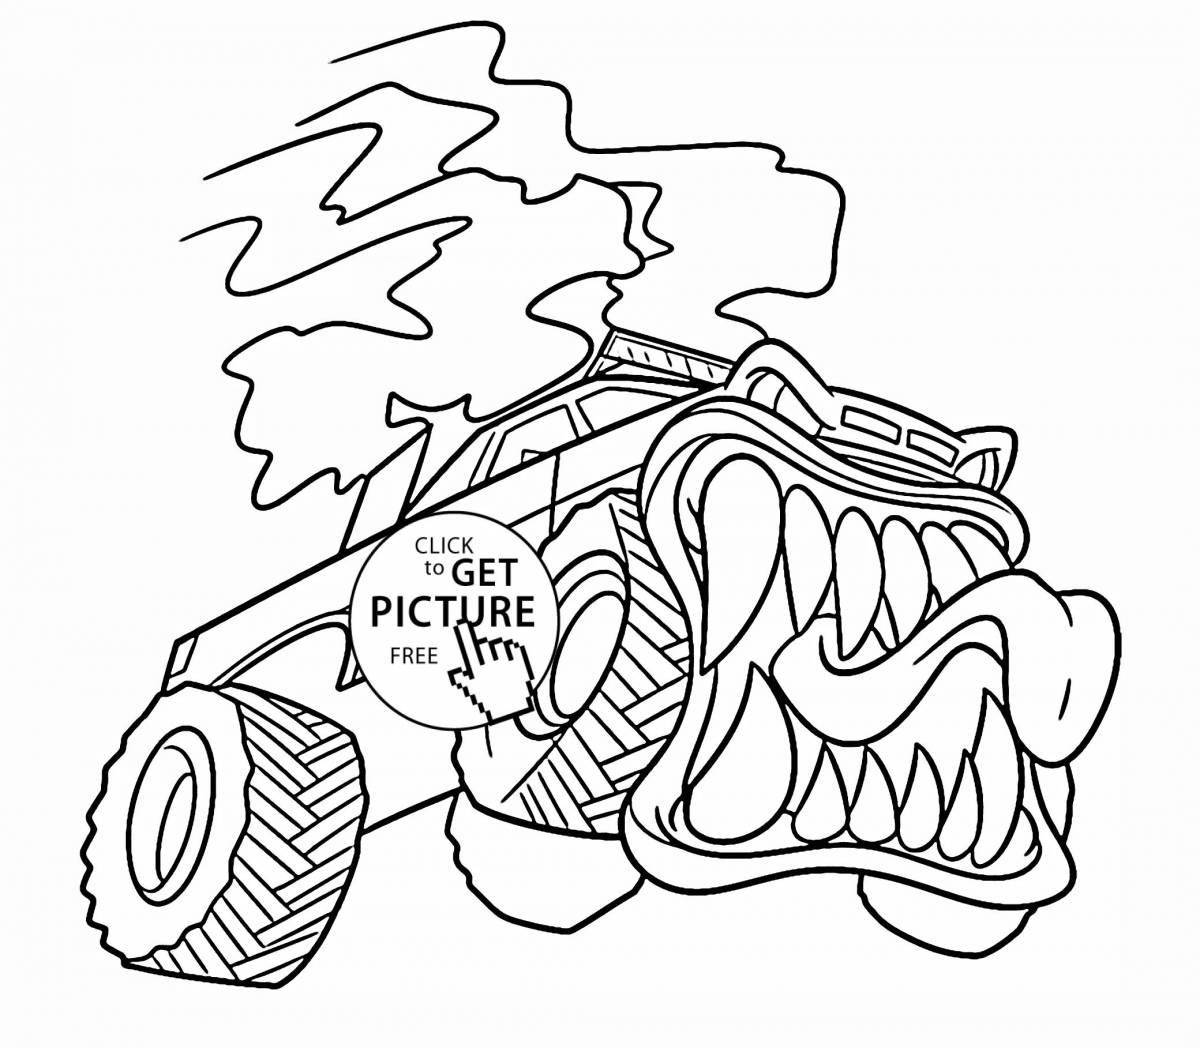 Shocking scary car coloring book